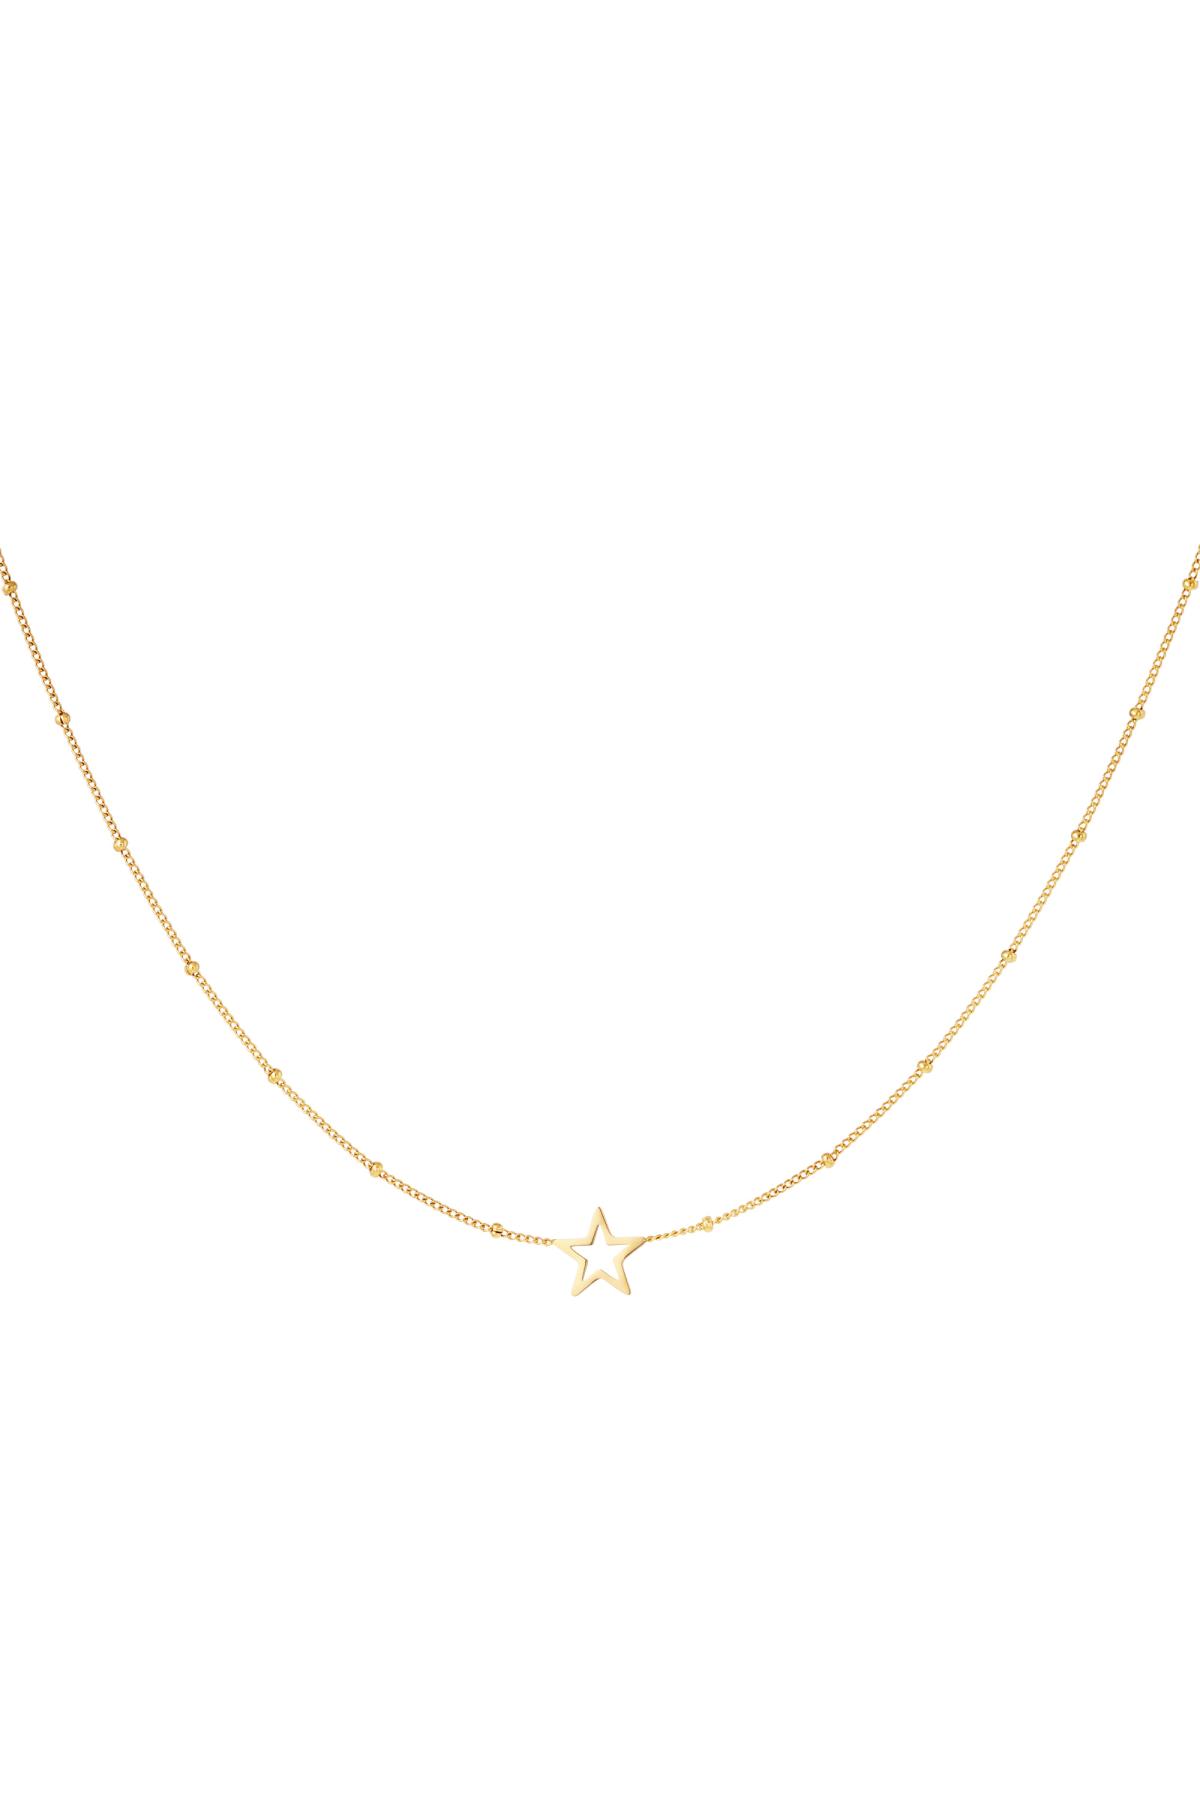 Gold / Minimalistic necklace open star Gold Stainless Steel Picture2